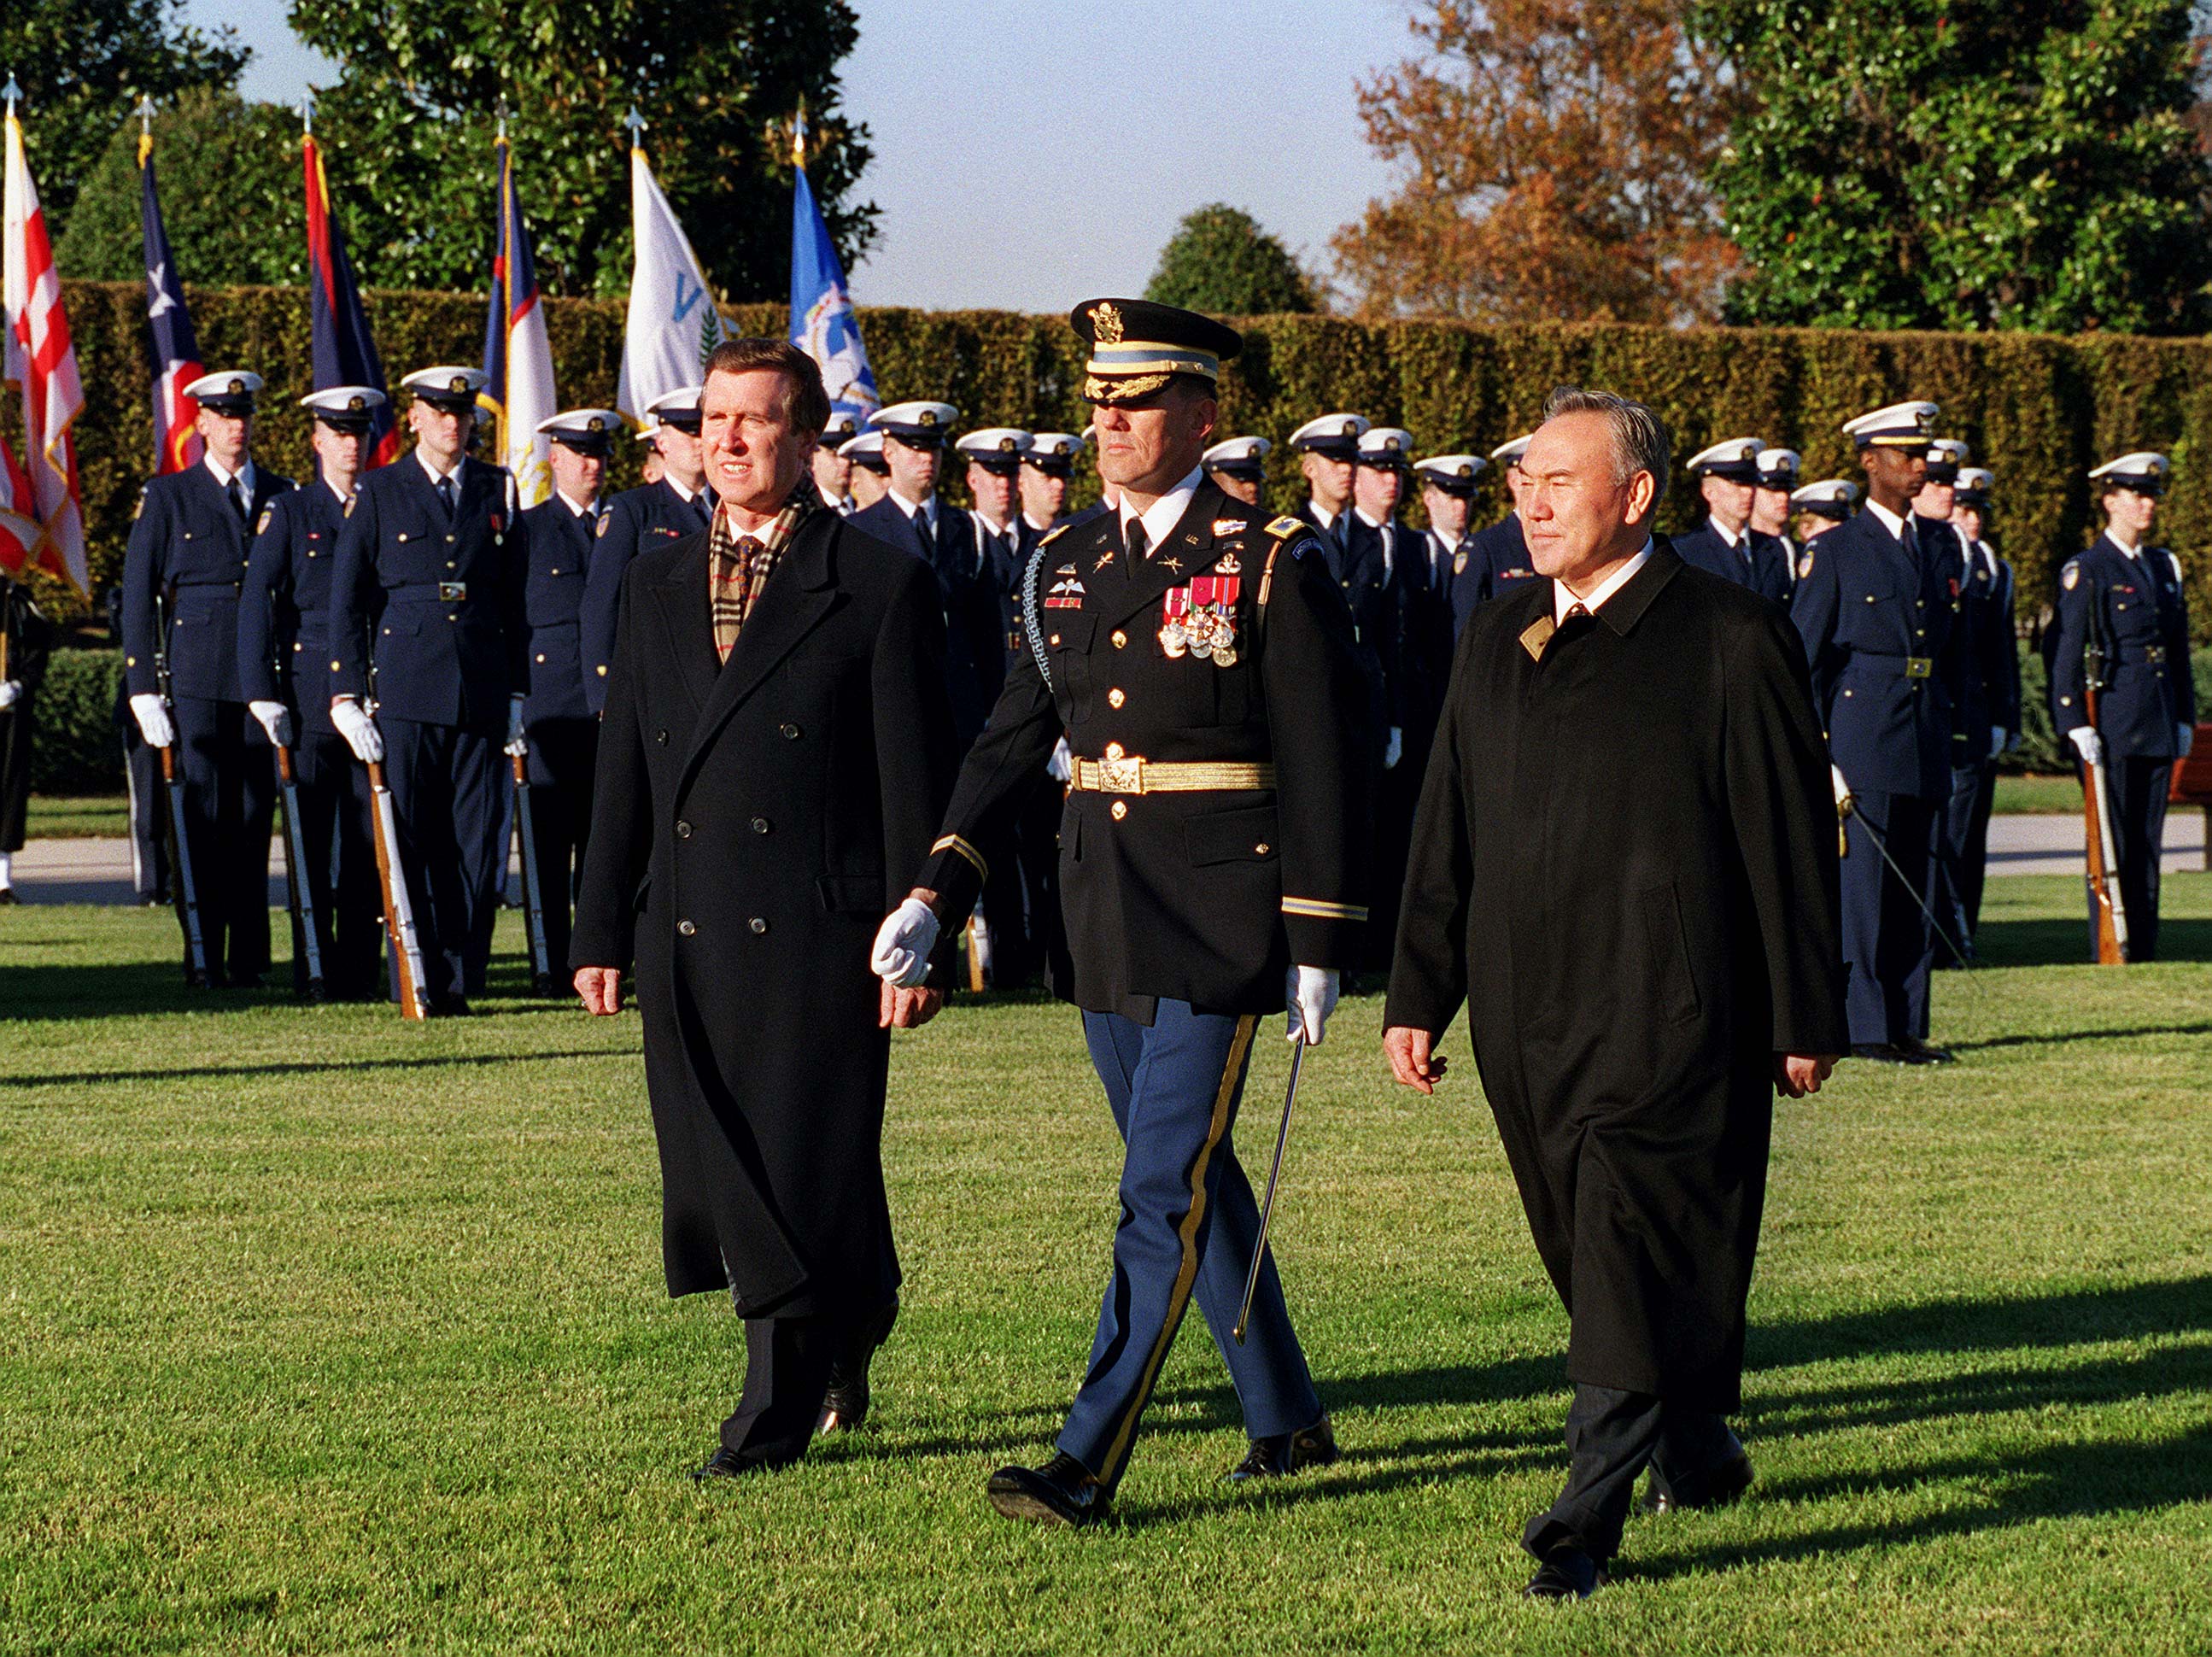 U.S. Secretary of Defense William Cohen (left) and President Nazarbayev (right) inspect a joint services honor guard during an arrival ceremony for Nazarbayev at The Pentagon, 1997.